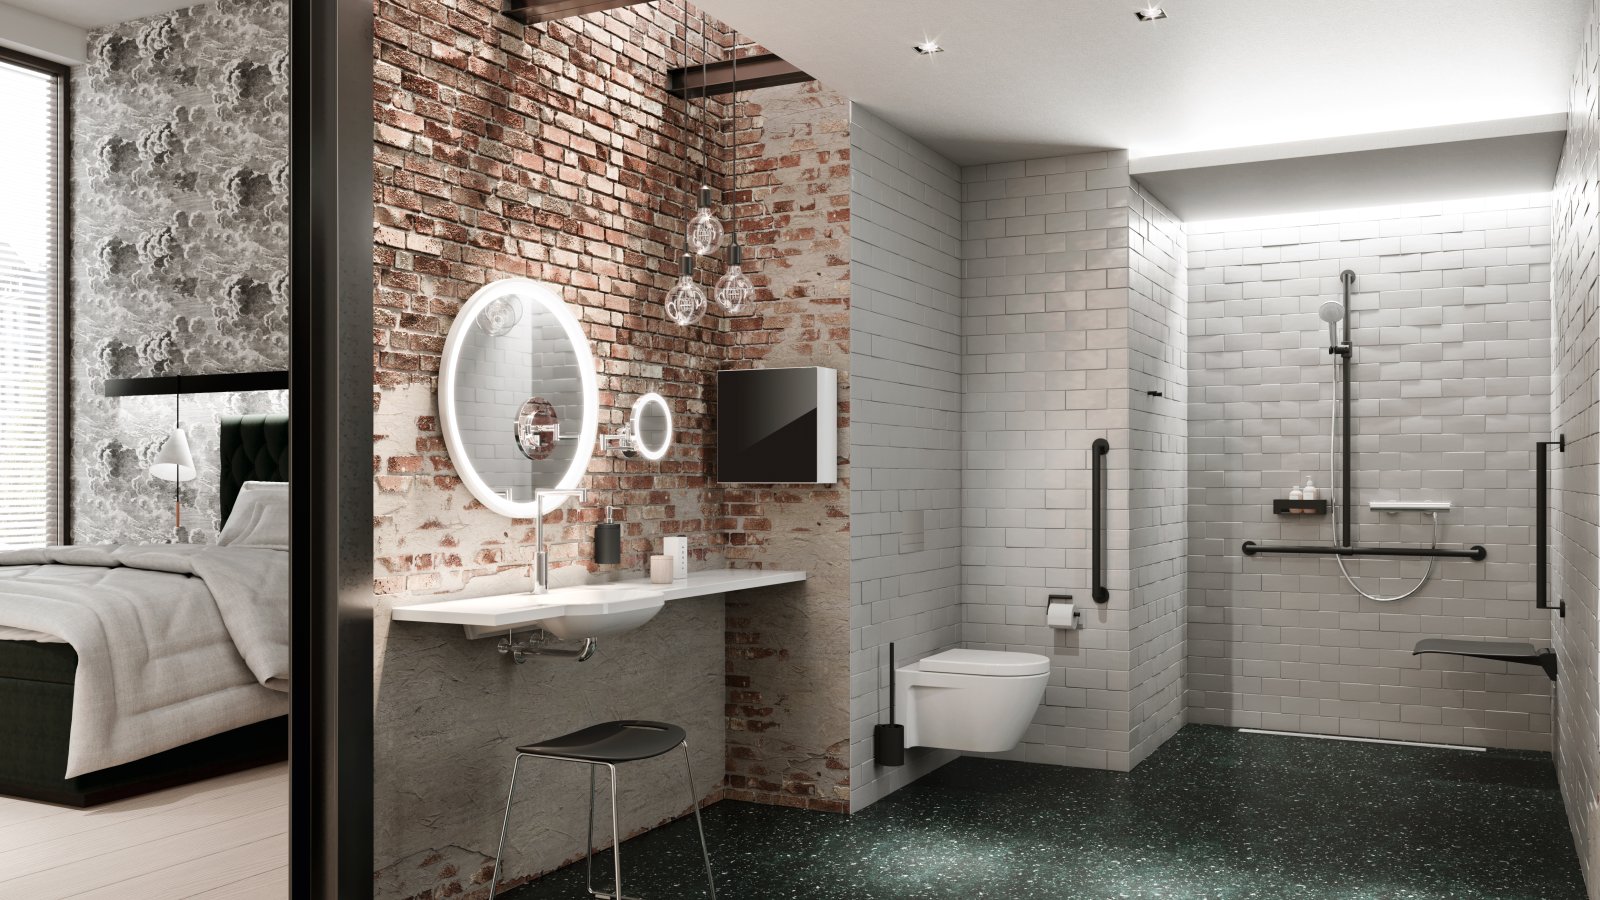 Barrier-free hotel bathroom with washbasin, shower area and WC